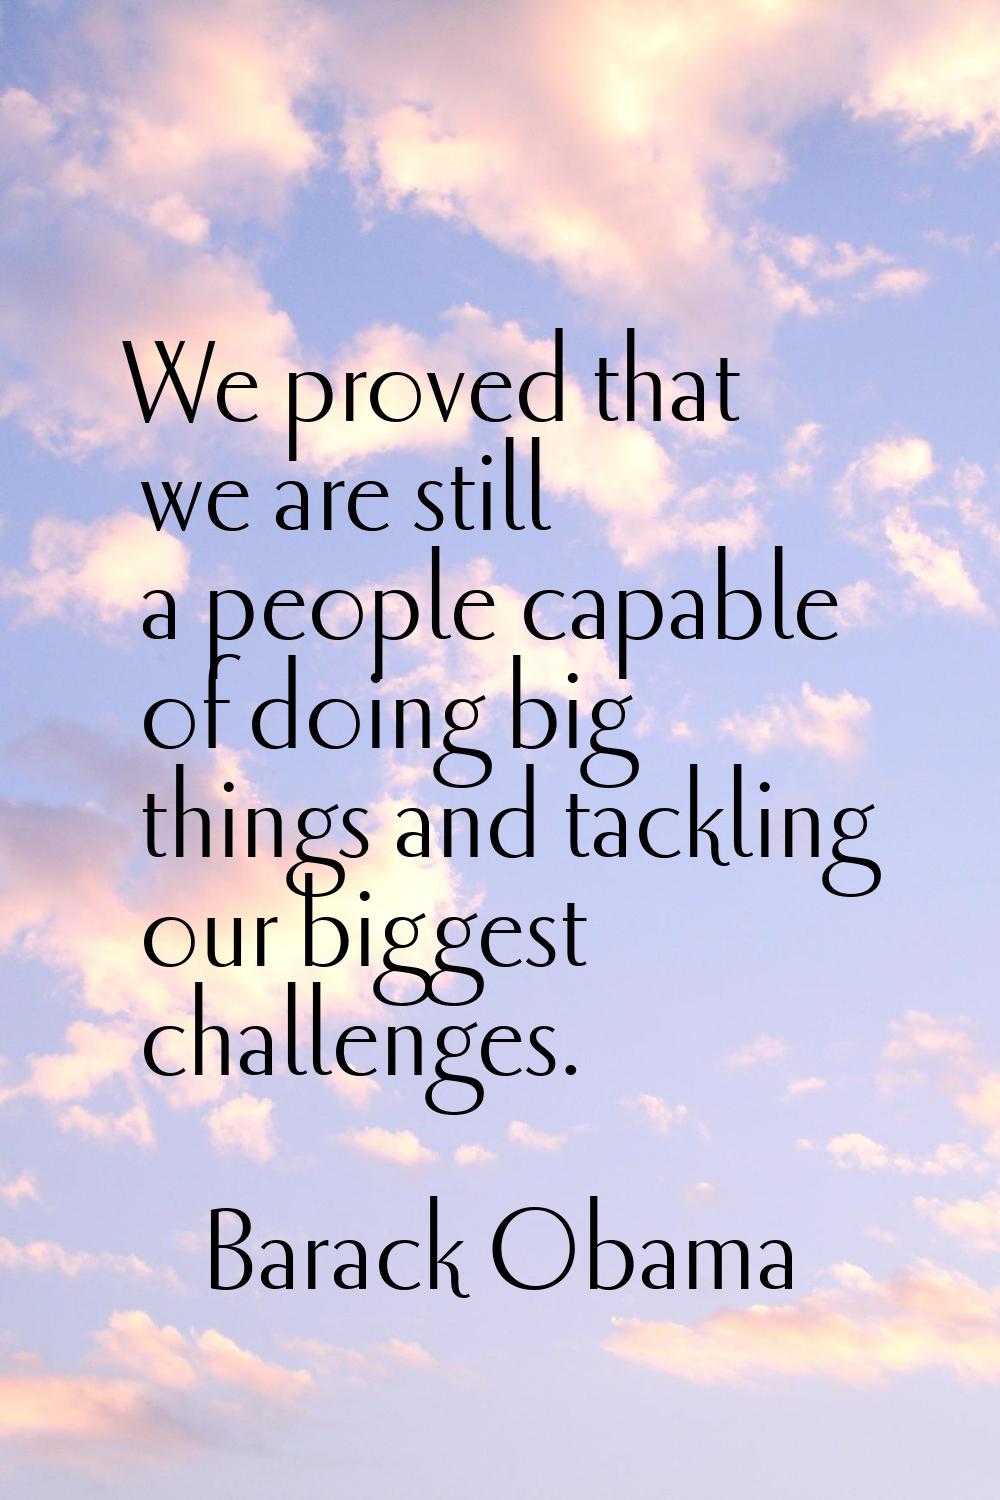 We proved that we are still a people capable of doing big things and tackling our biggest challenge